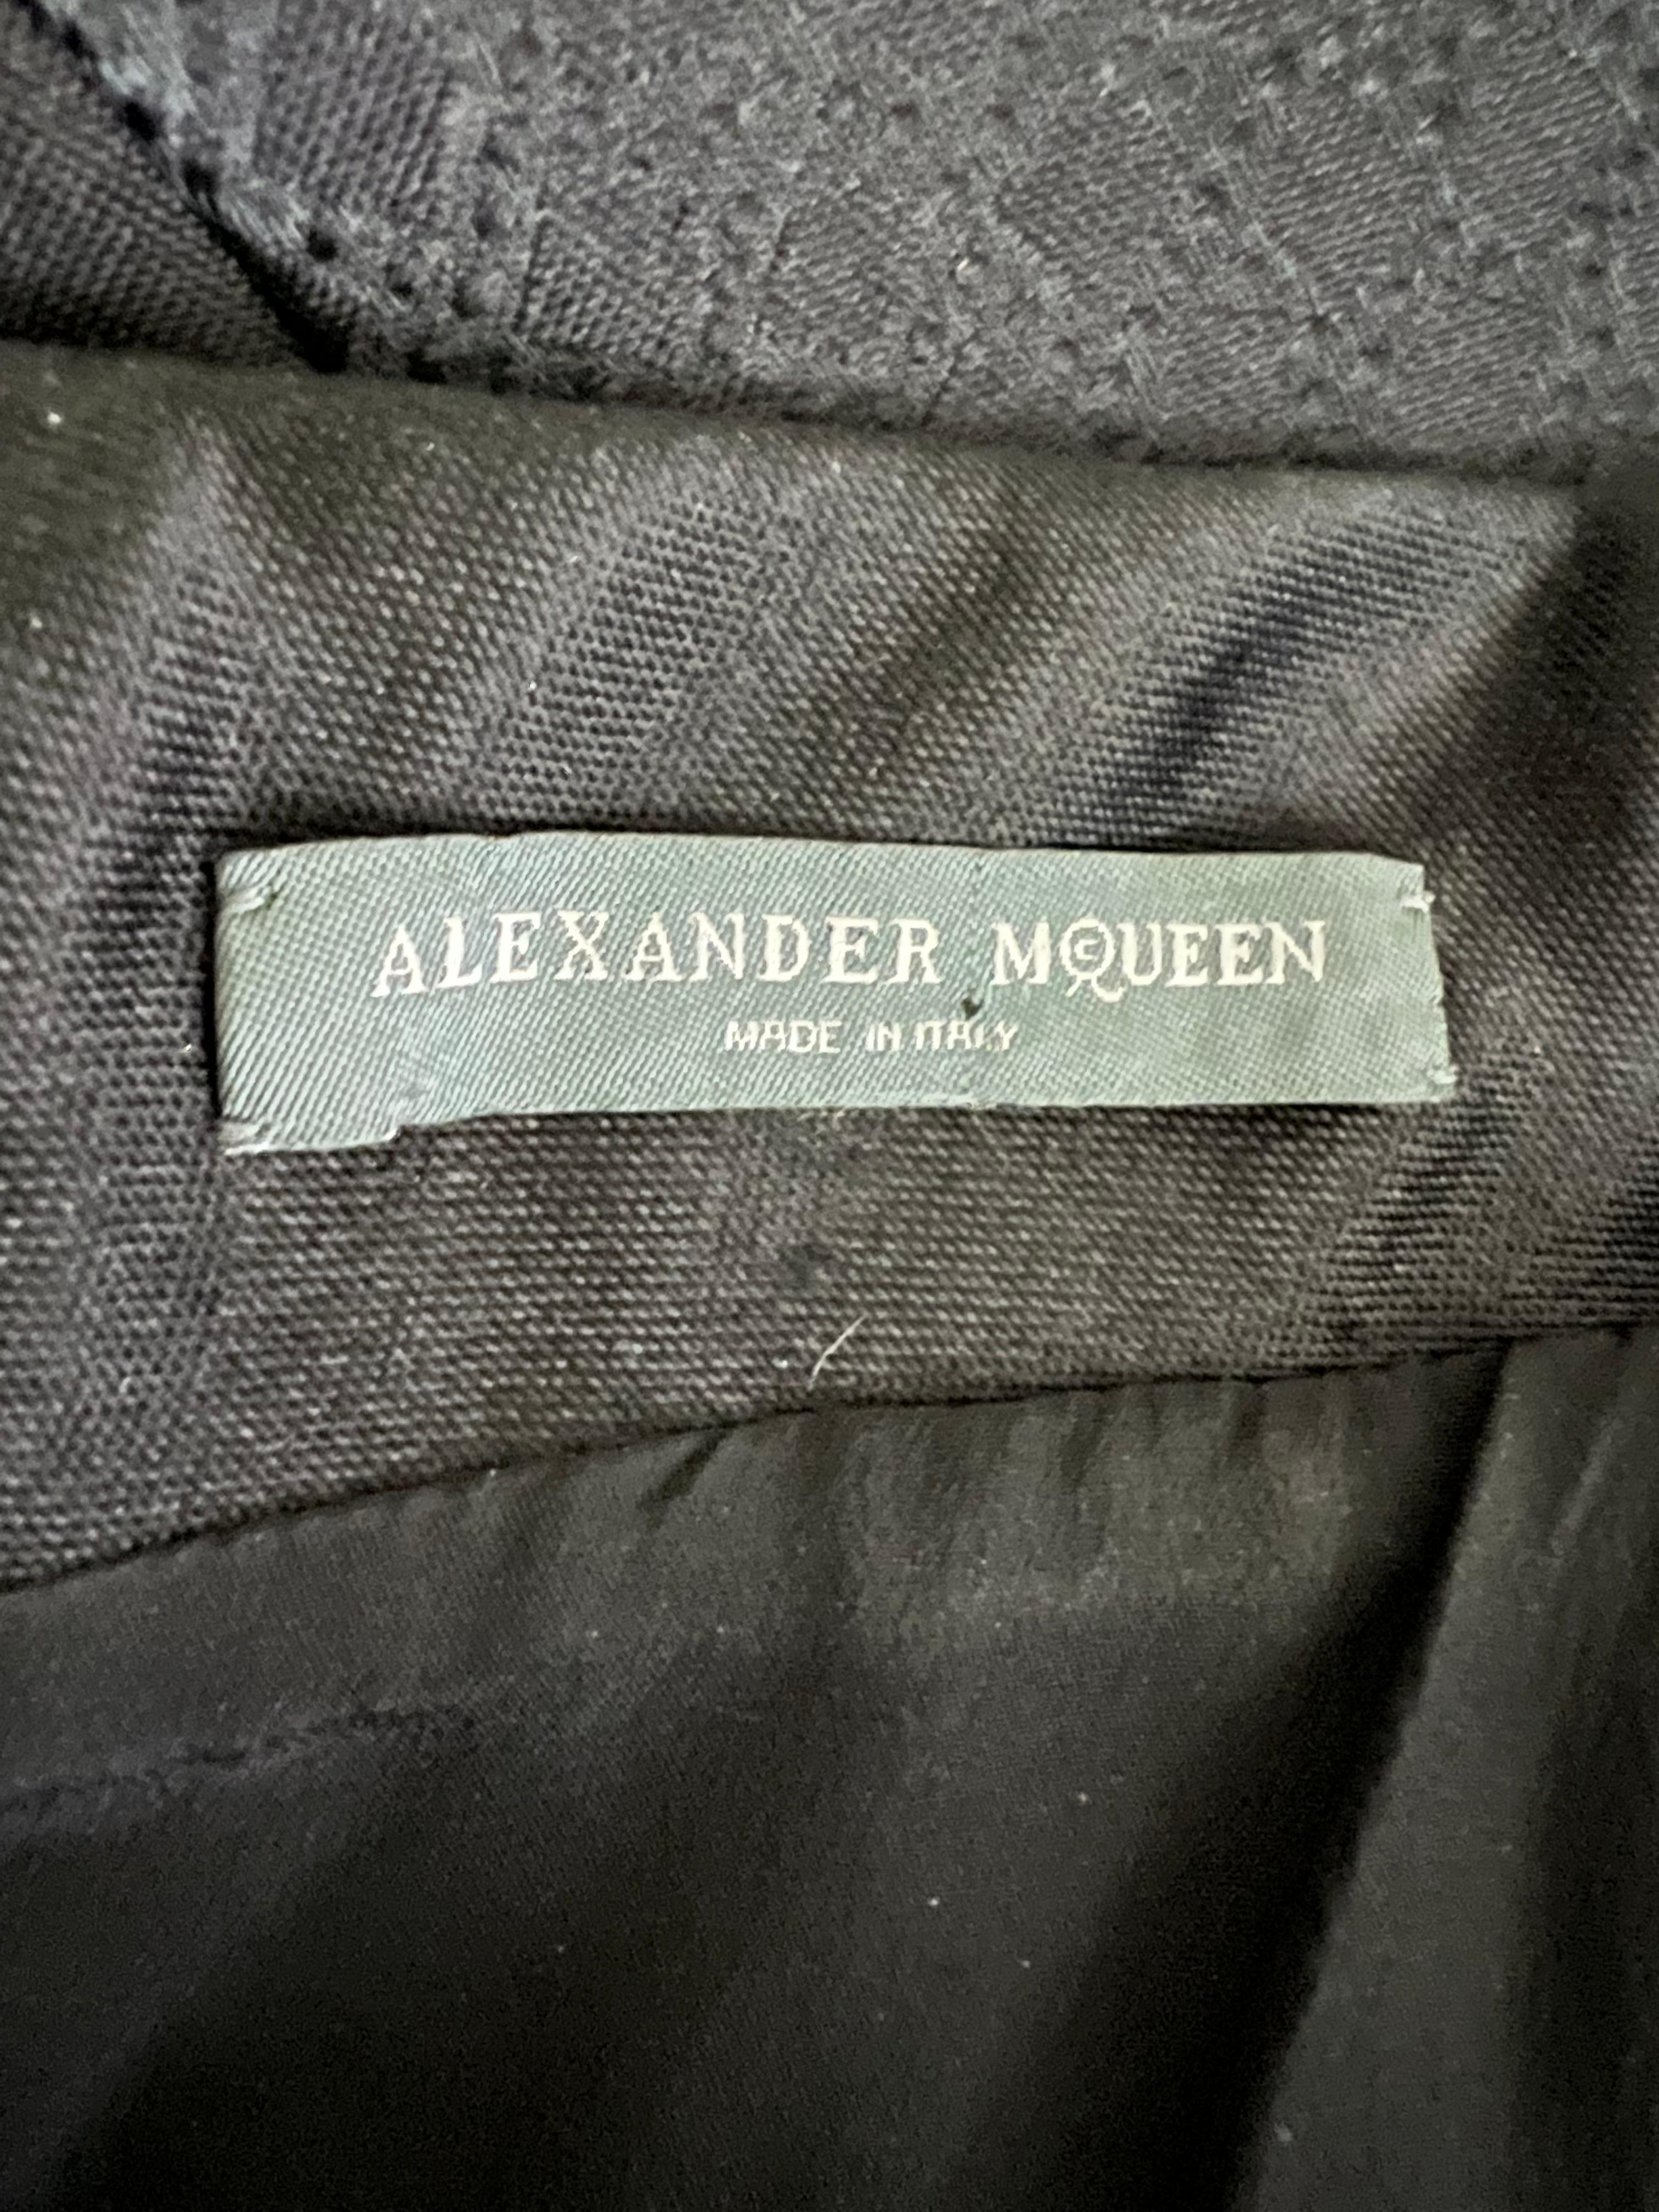 Alexander McQueen Mini Dress Black and Pink, Size Small In Excellent Condition For Sale In Beverly Hills, CA